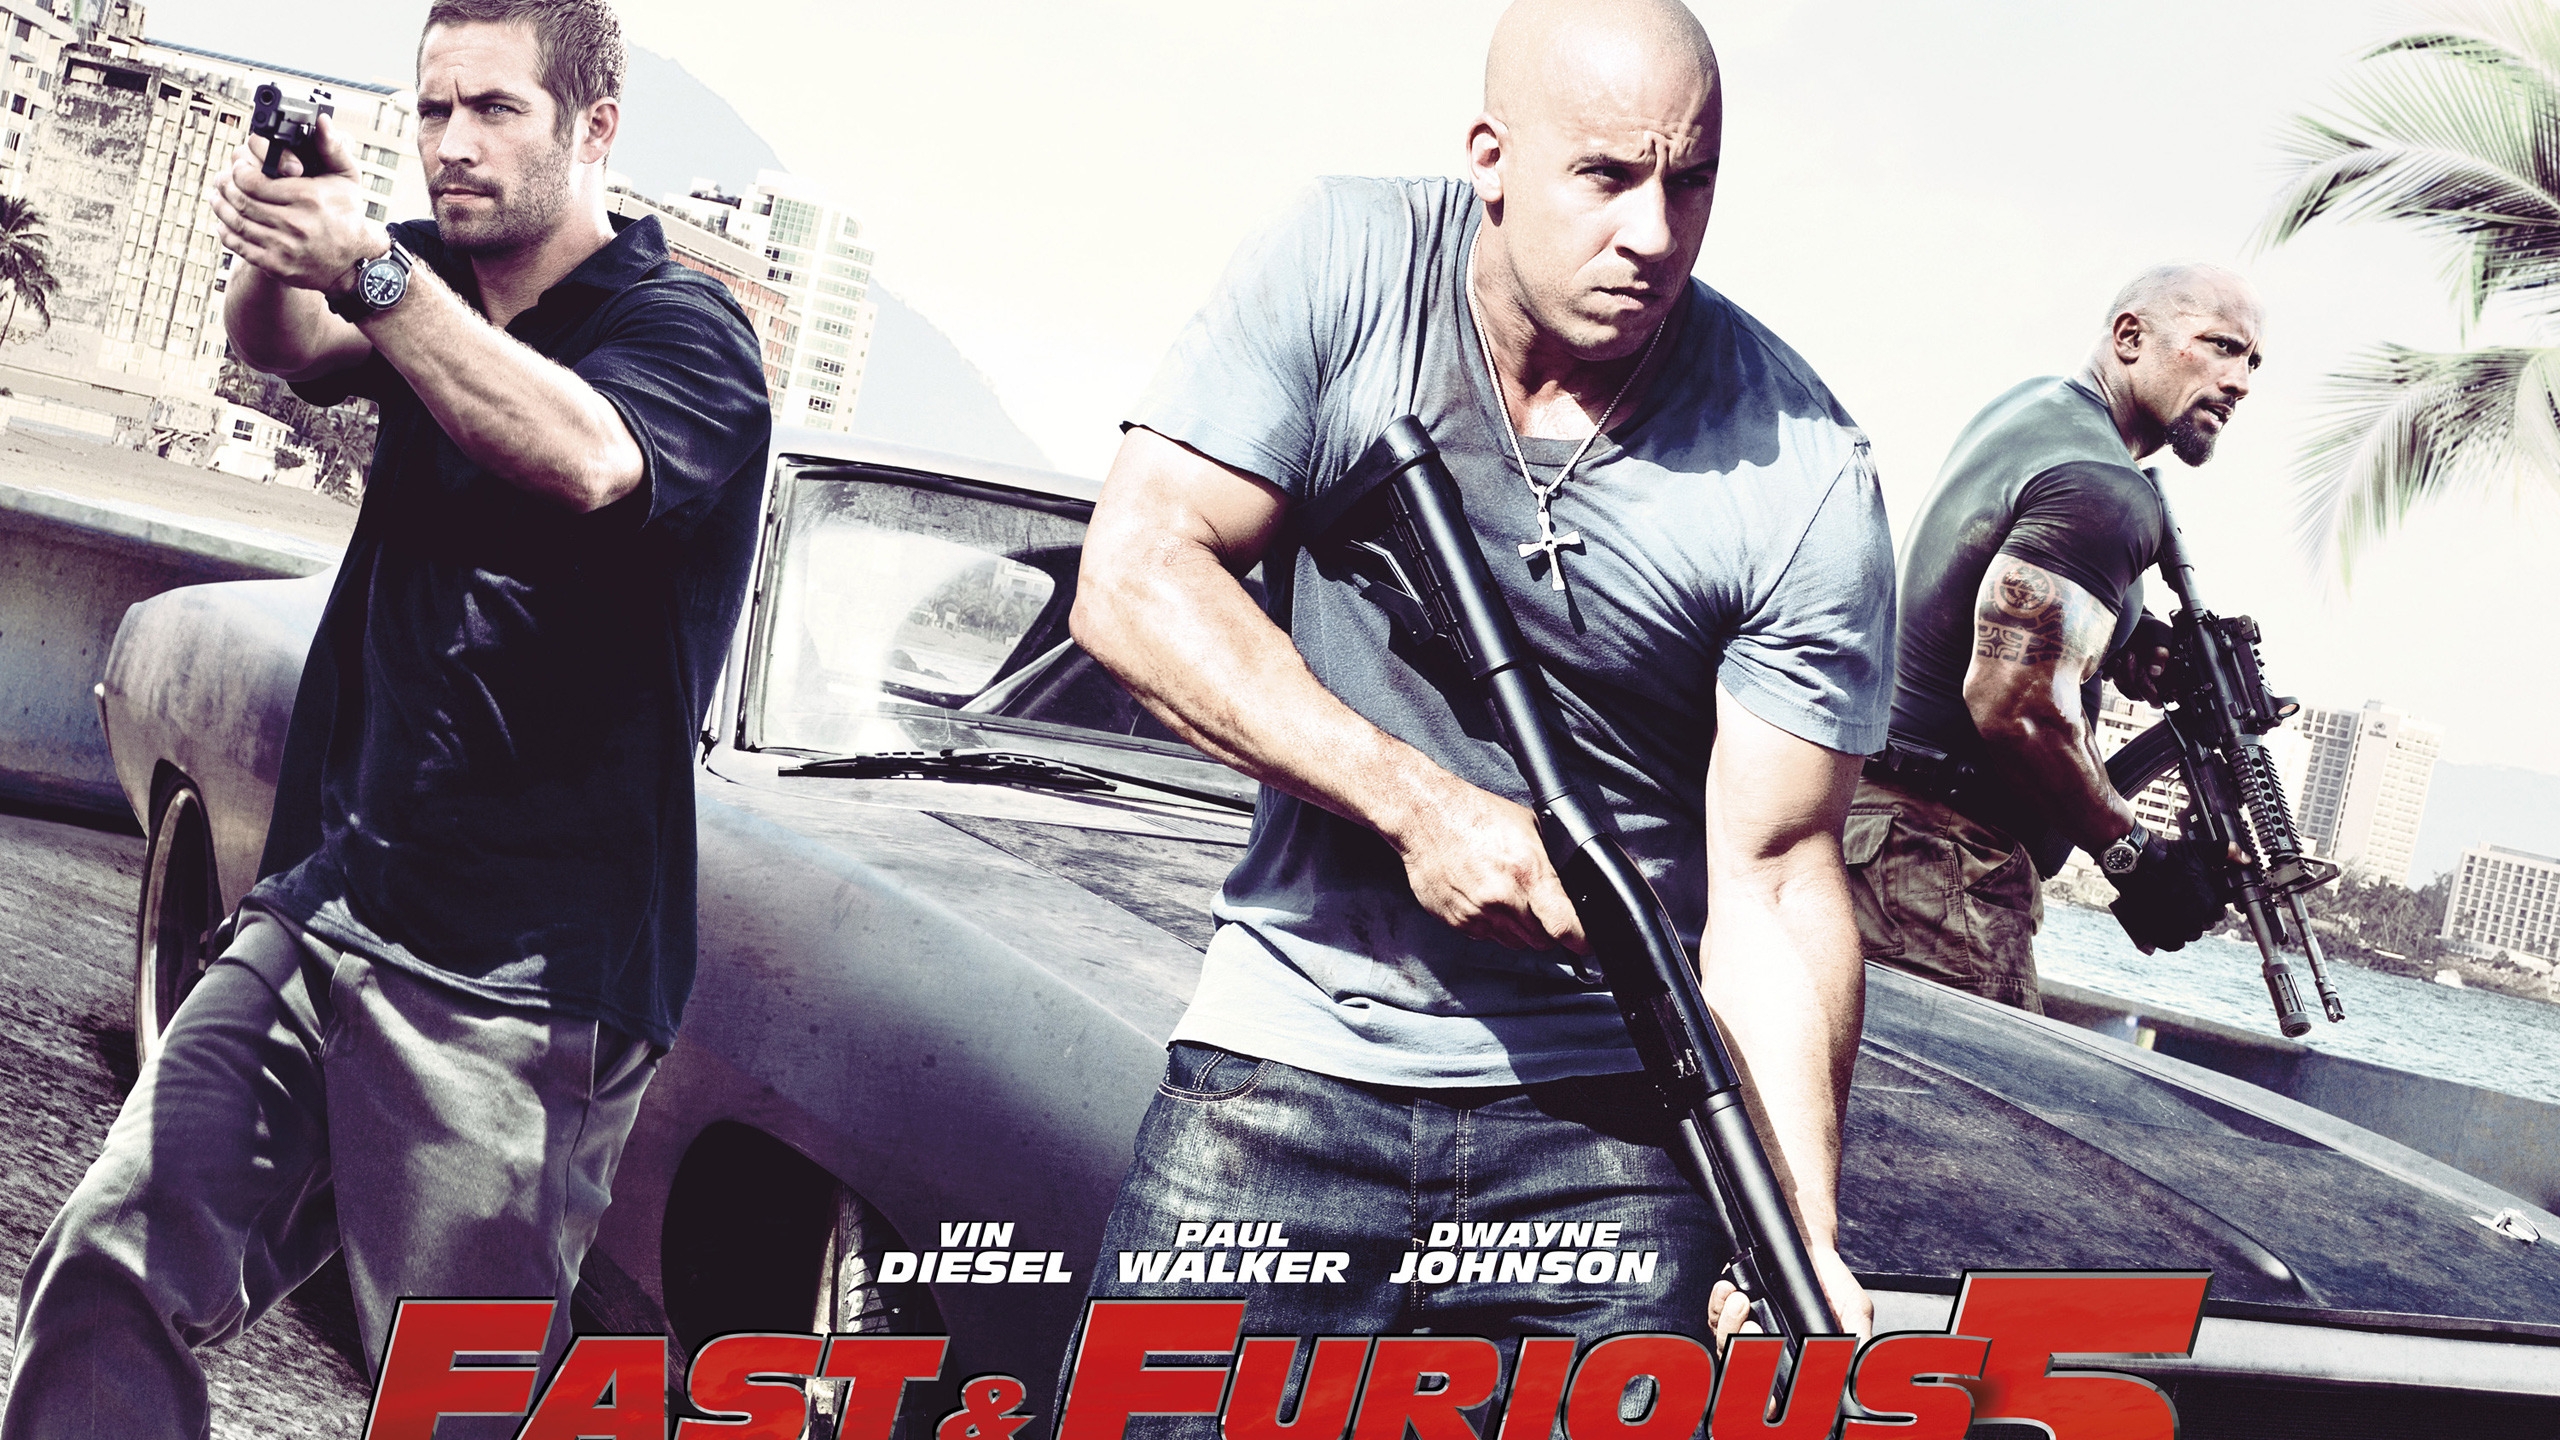 Fast and Furious 5 Movie for 2560x1440 HDTV resolution